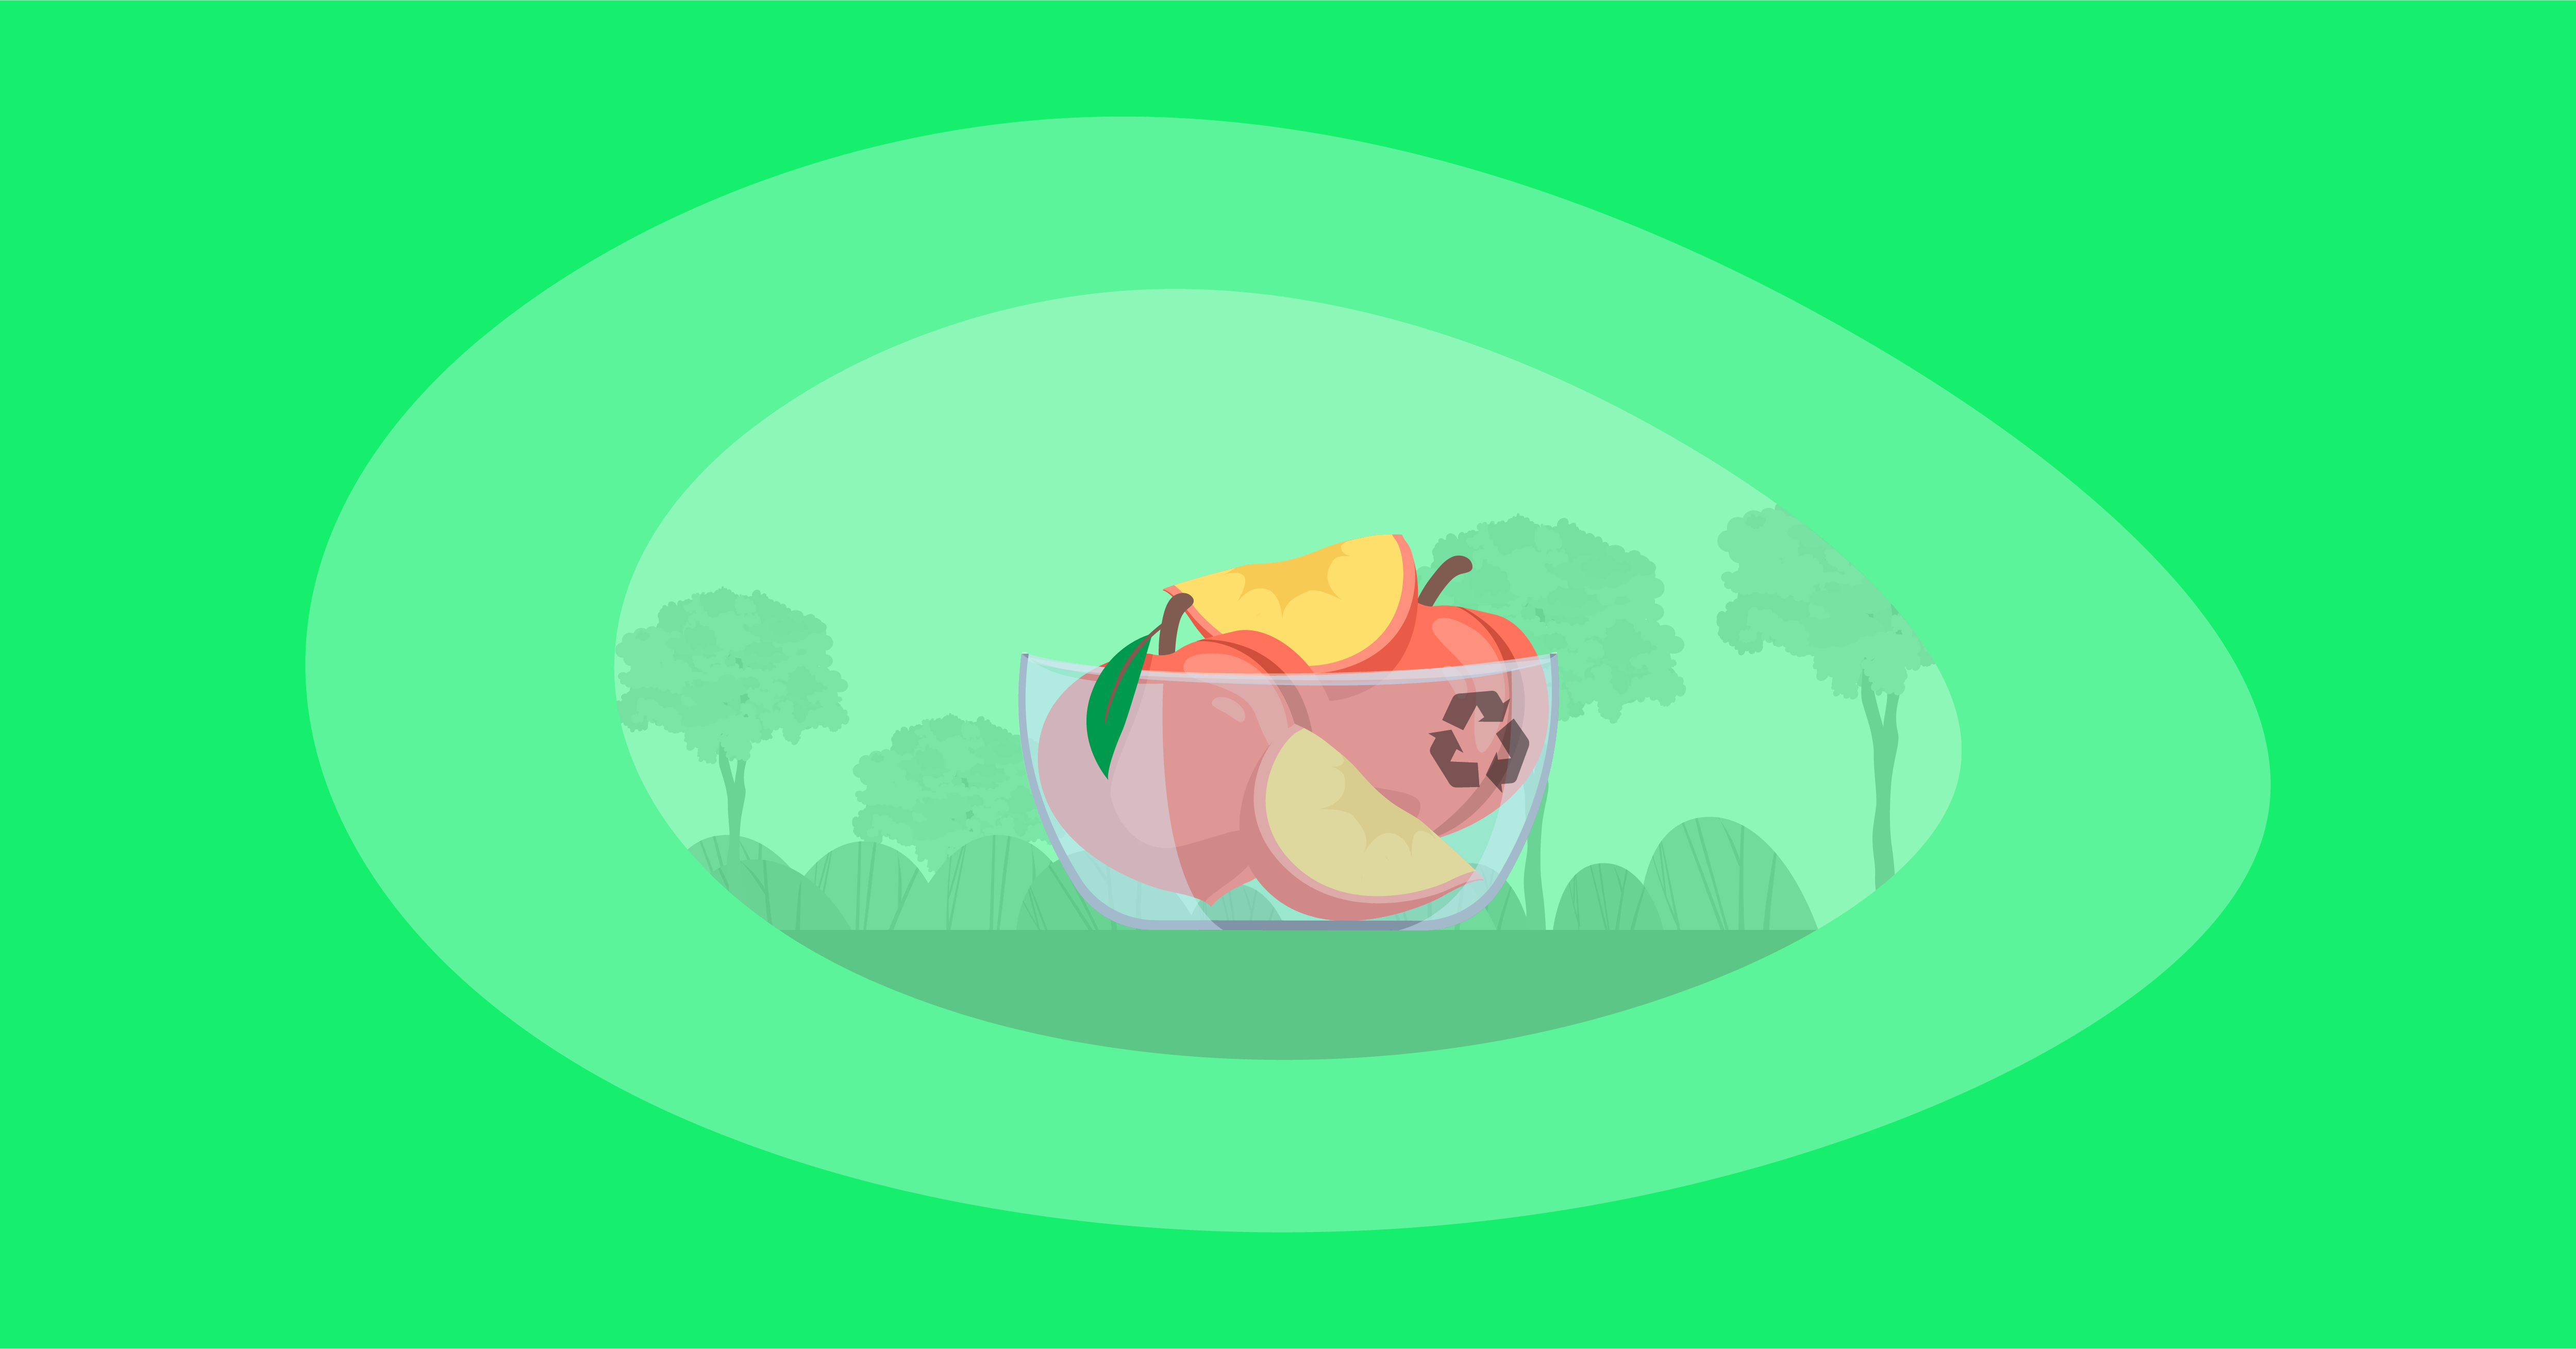 Illustration of peaches inside a glass bowl